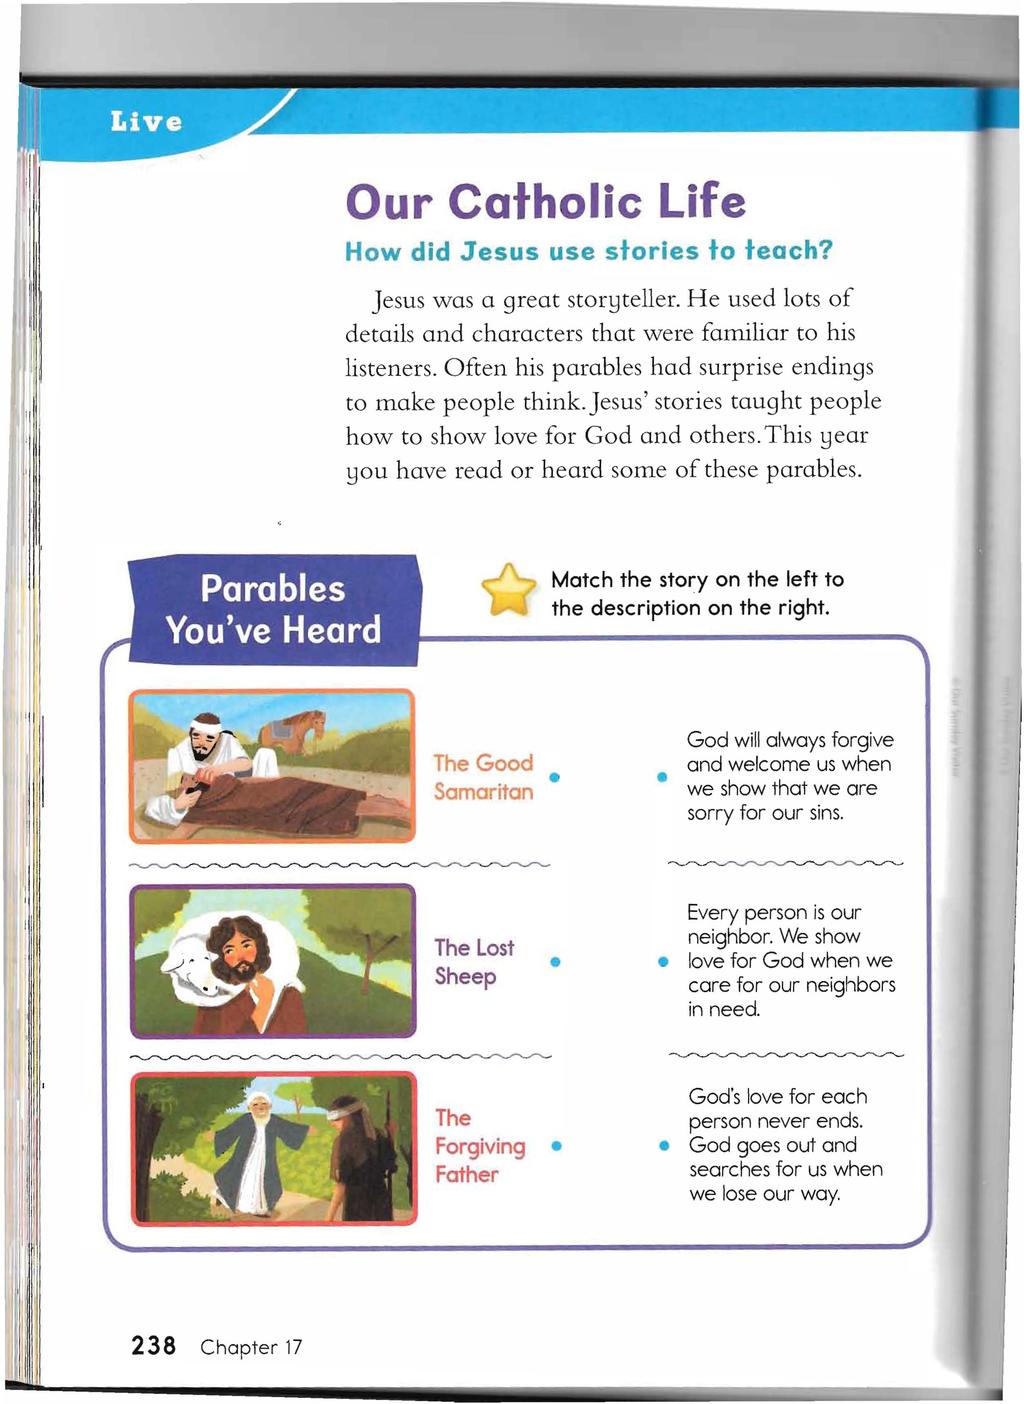 Our Catholic Life How did 3 esus use stories to teach? Jesus was a great stor~teller. He used lots of details and characters that were familiar to his listeners.